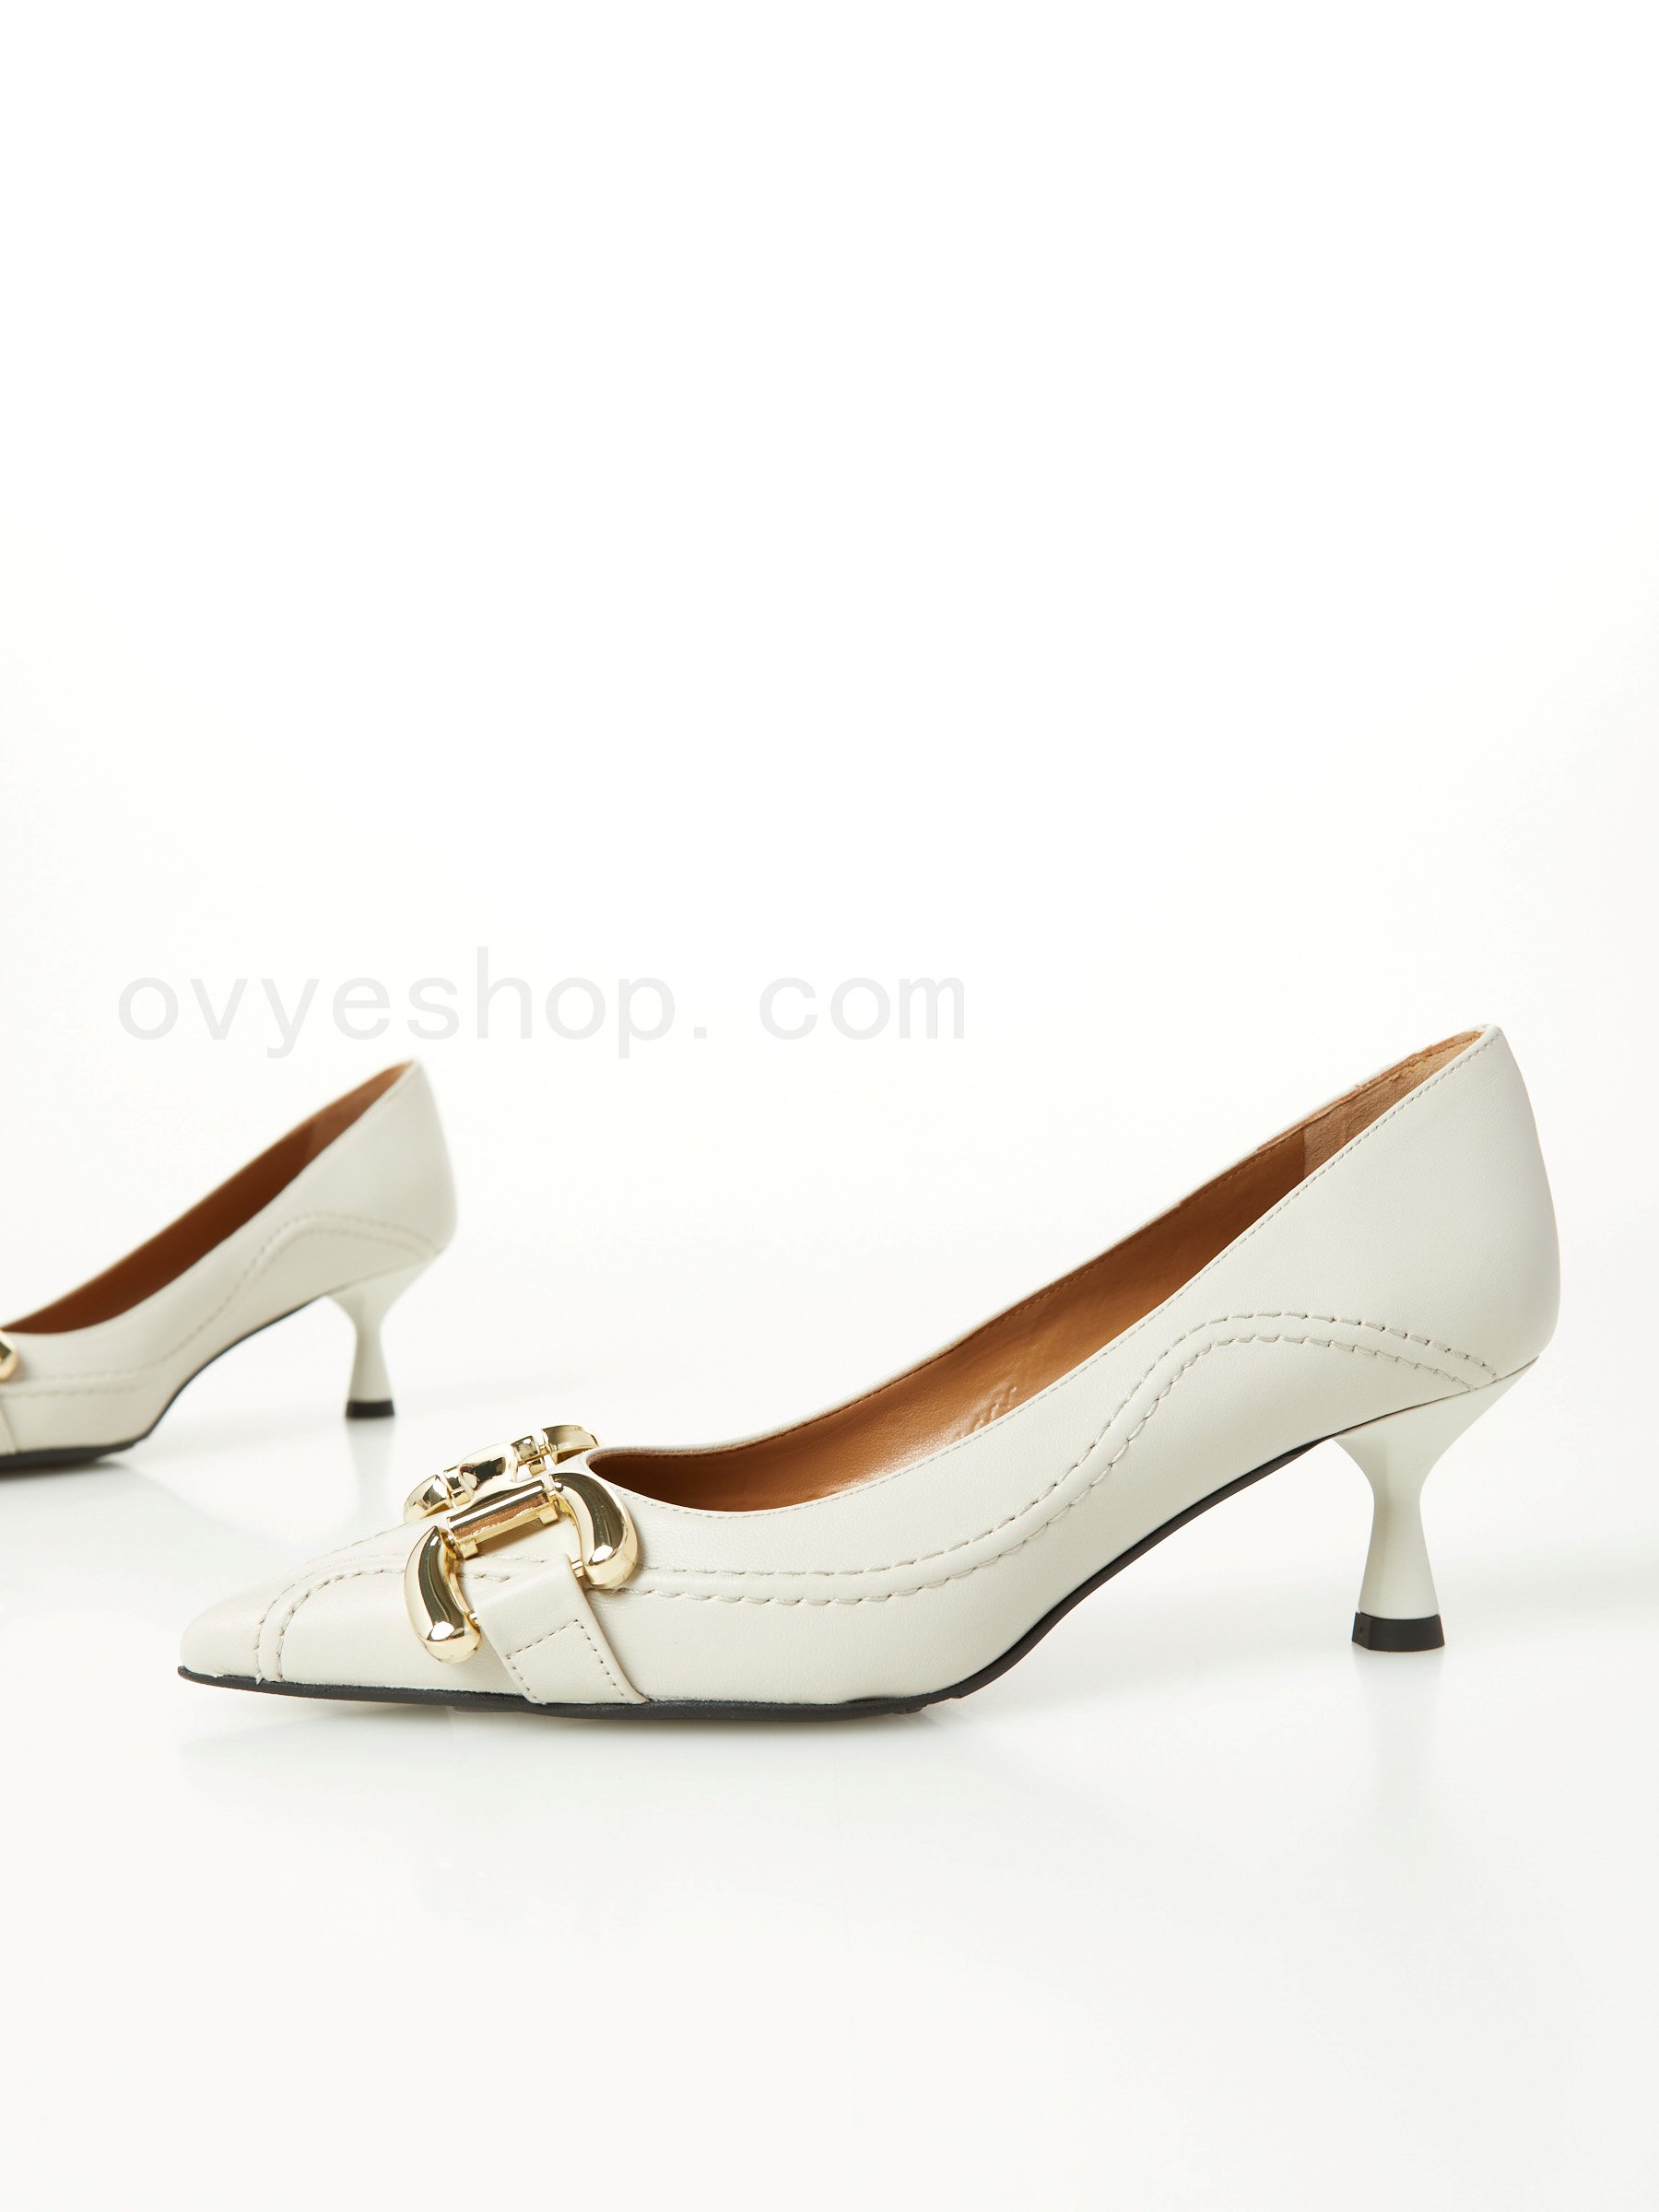 scarpe ovy&#232; outlet Leather Pump F0817885-0605